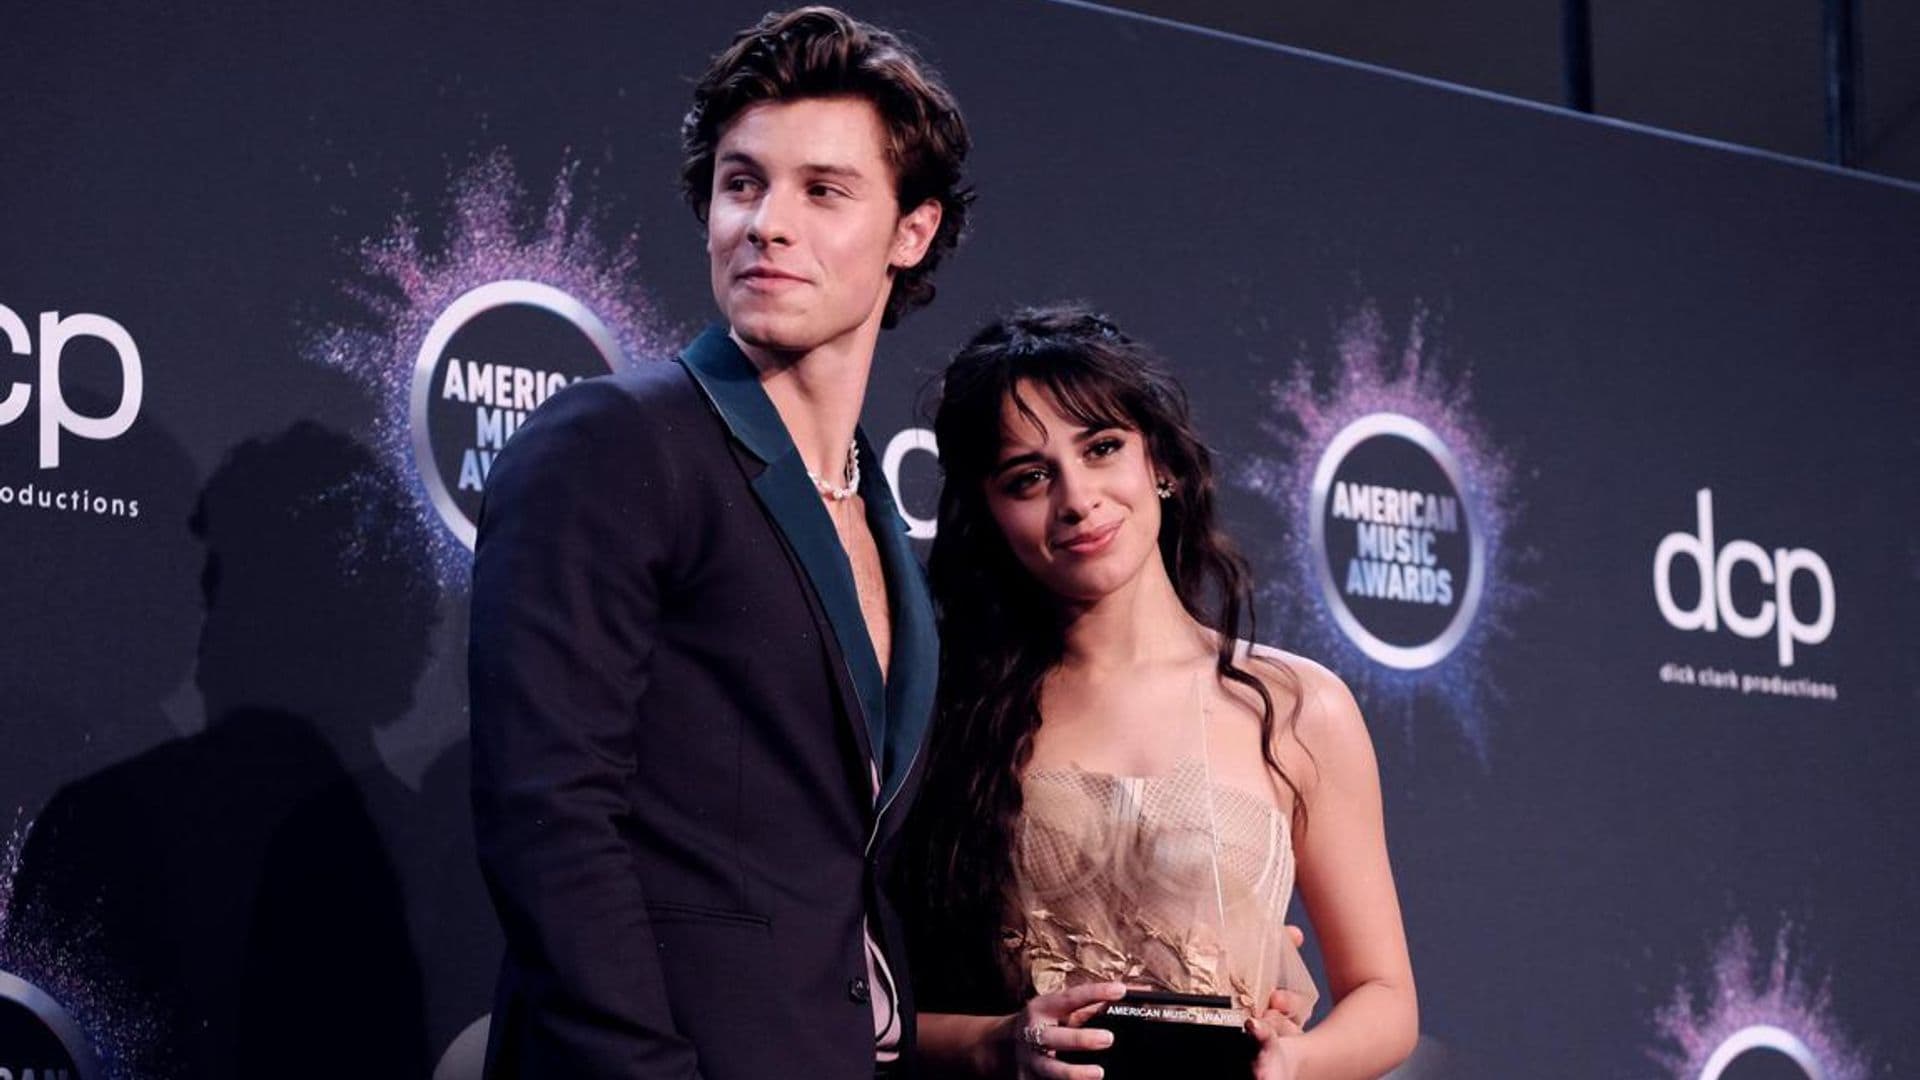 After breakup rumors, Camila Cabello shares a photo presumably wearing Shawn Mendes sweater